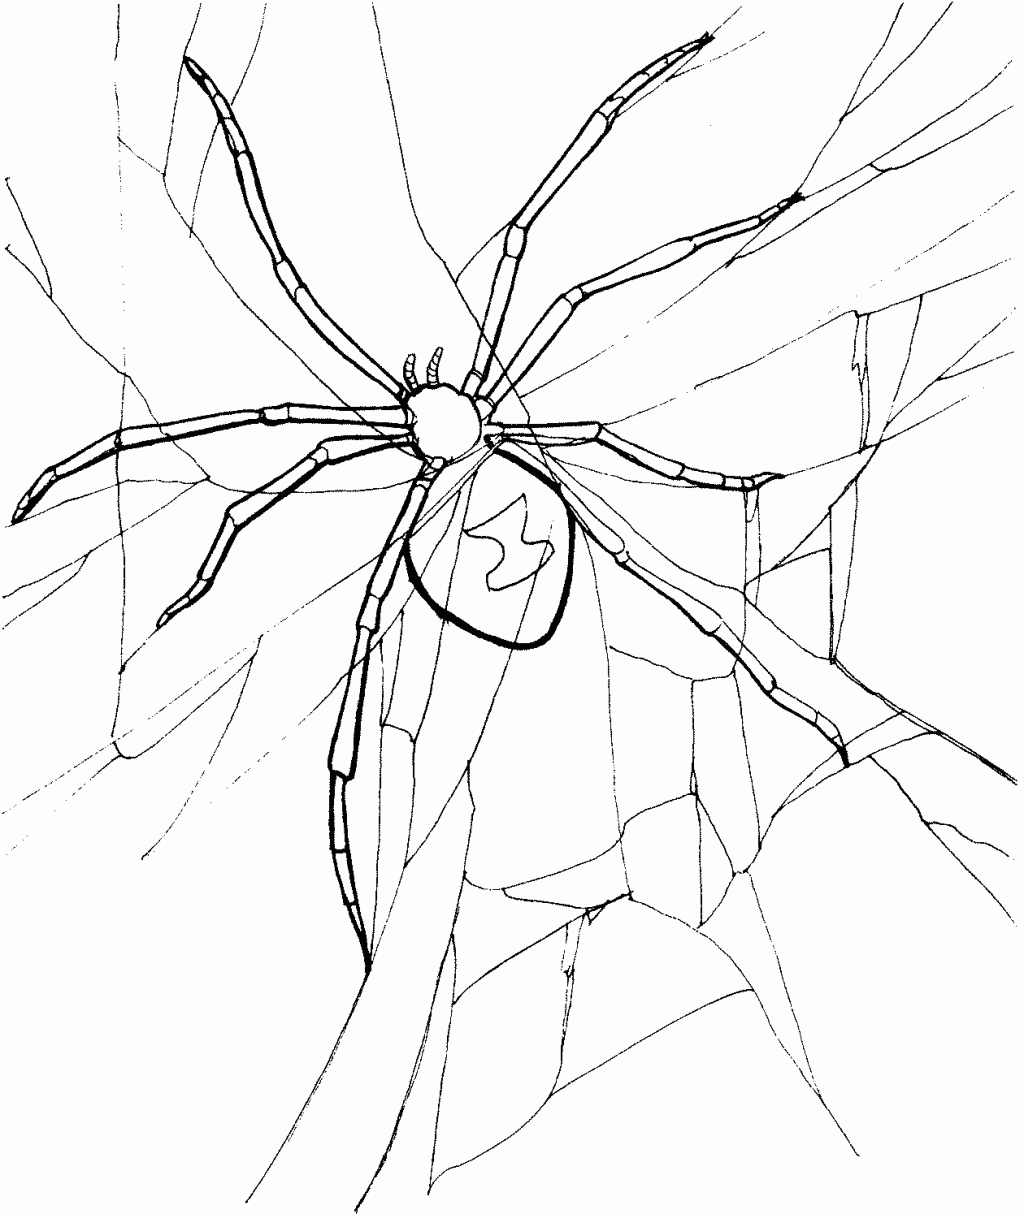 black widow spider coloring page free printable spider coloring pages for kids page black widow spider coloring 